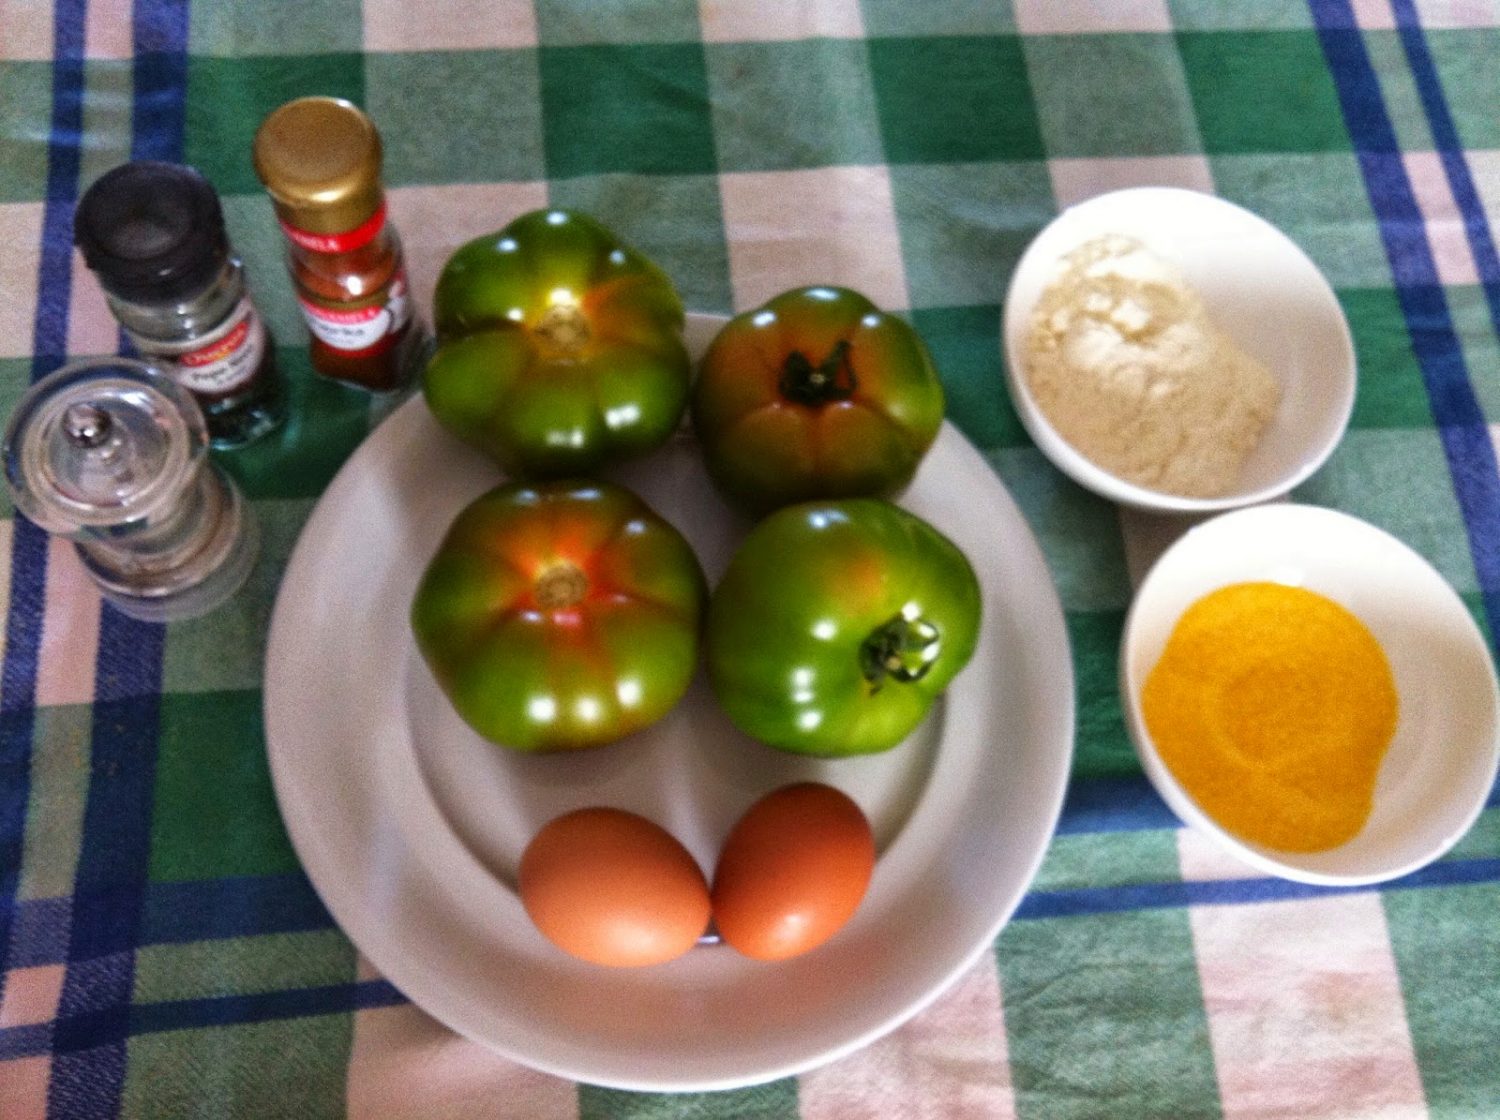 Fried-Green-Tomatoes-Ingredients